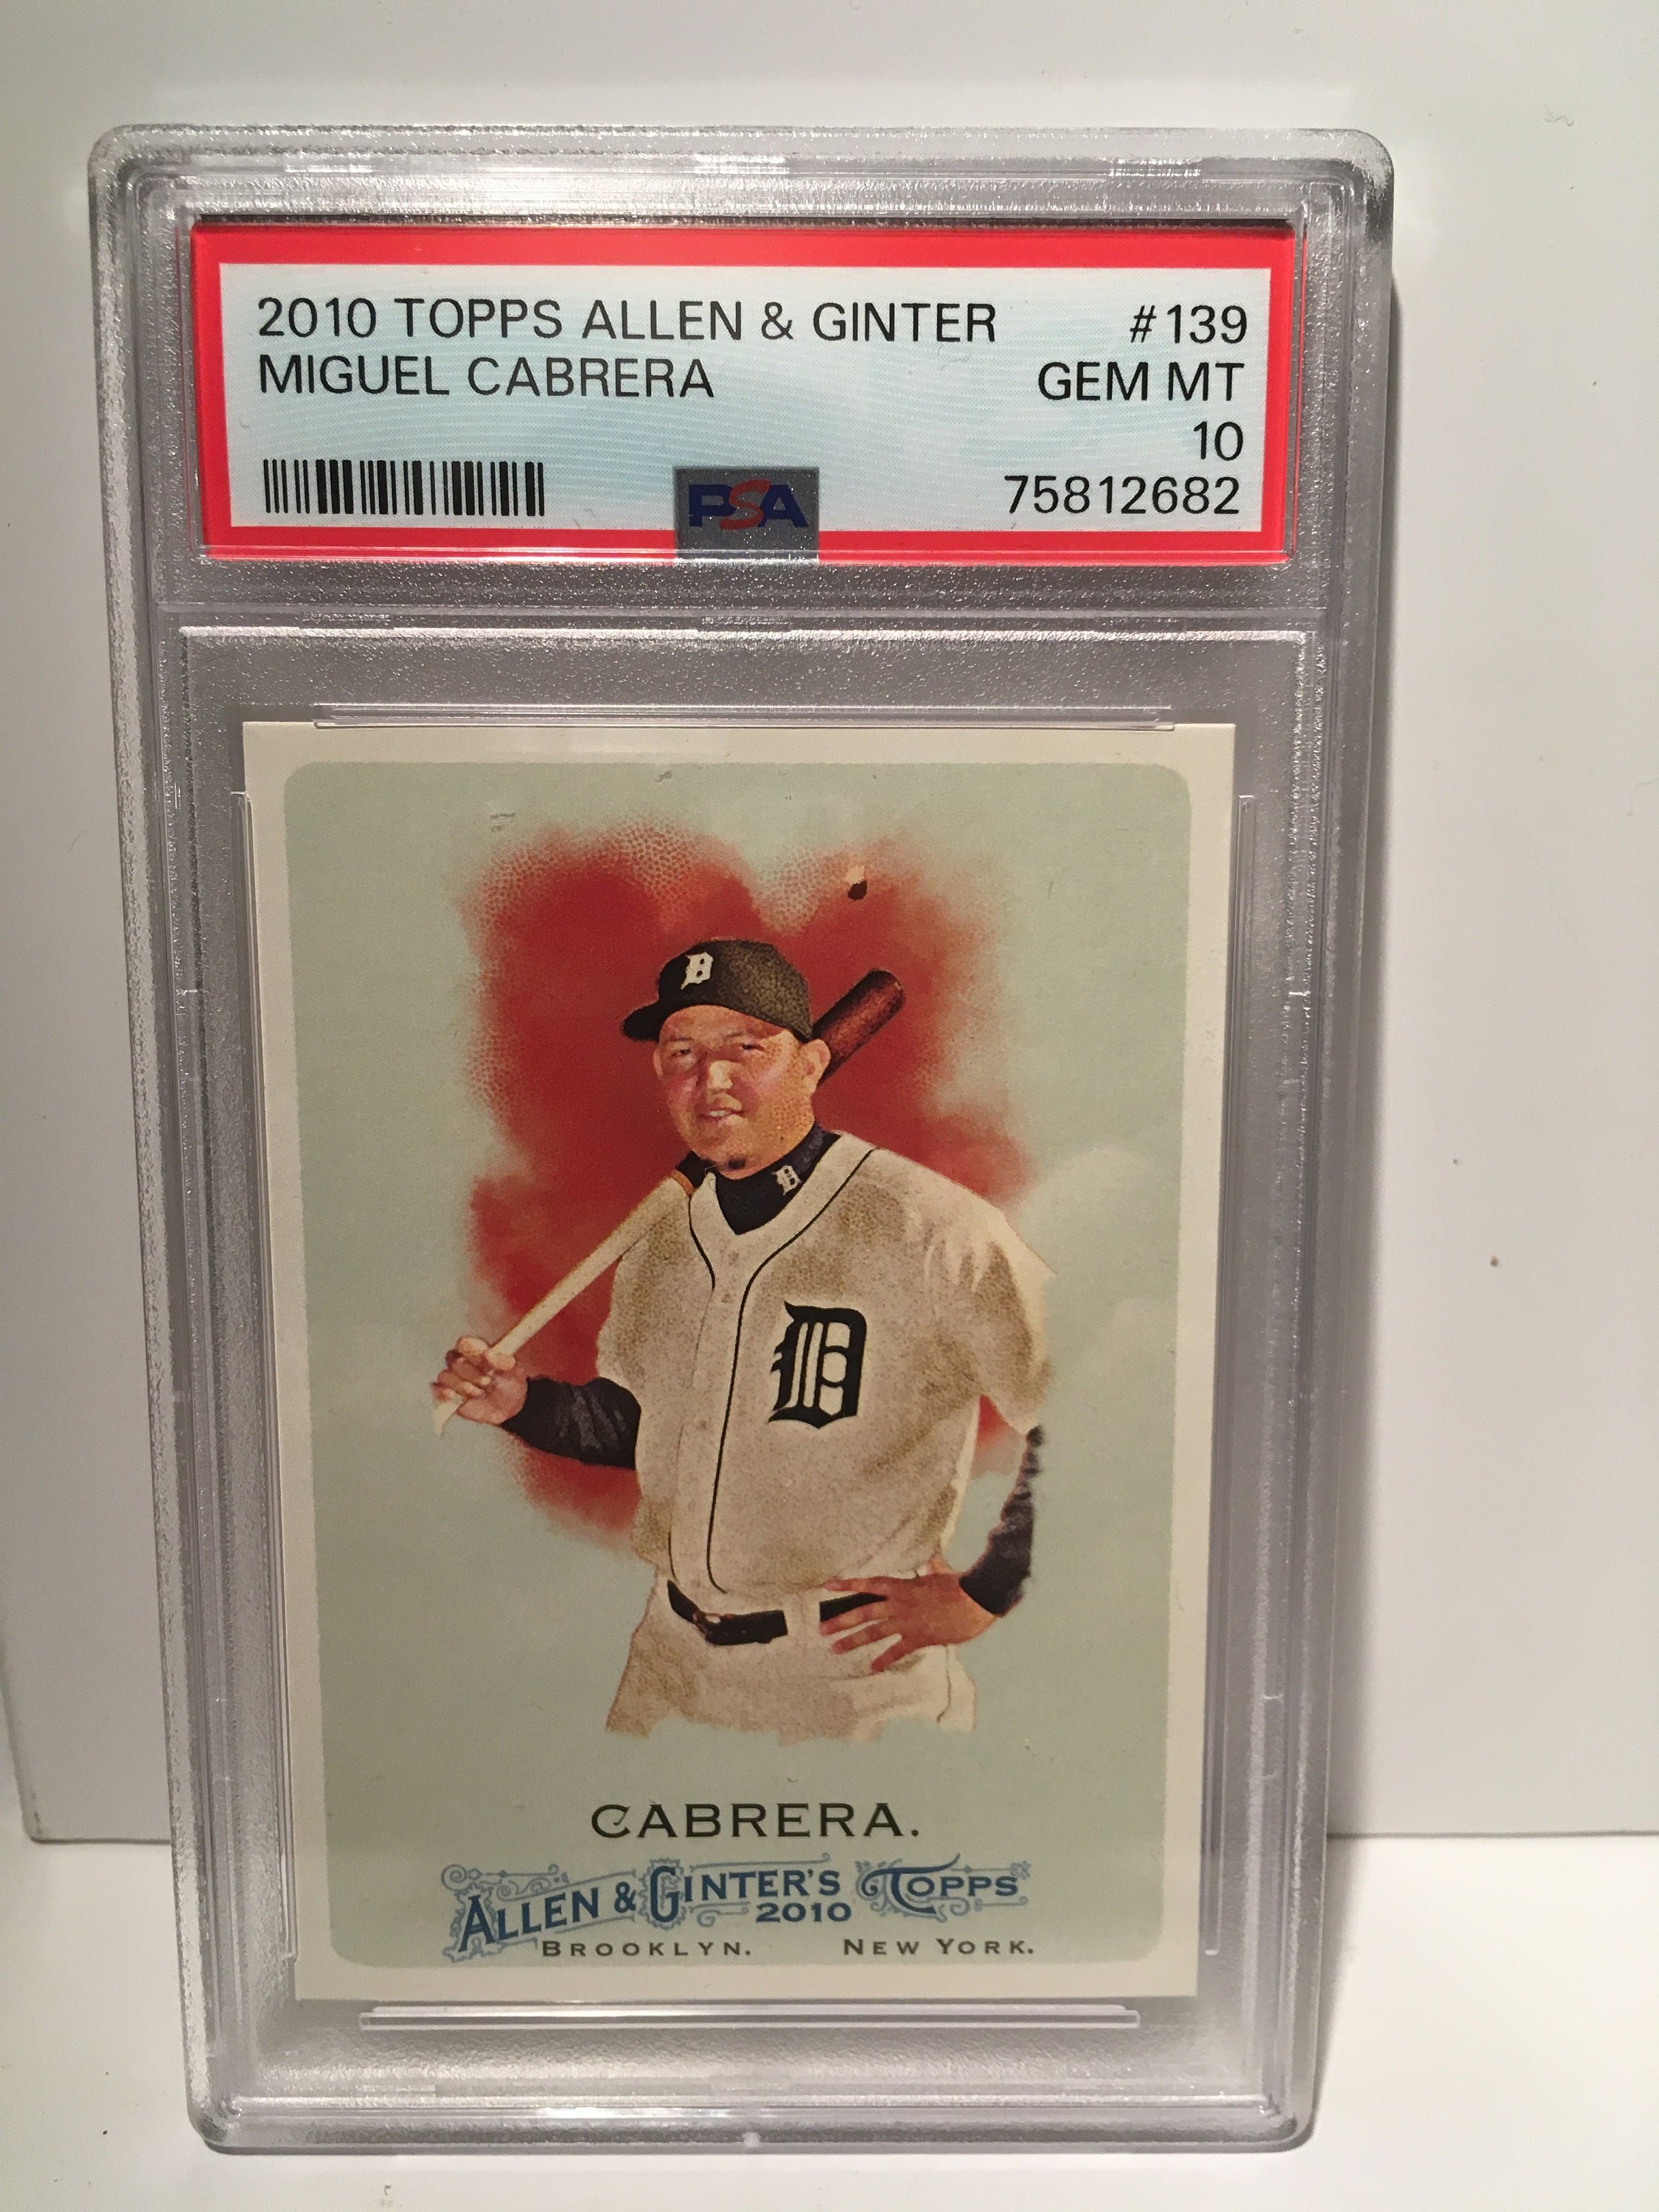 Sold at Auction: 2004 Miguel Cabrera Game Used Bat/jersey Card